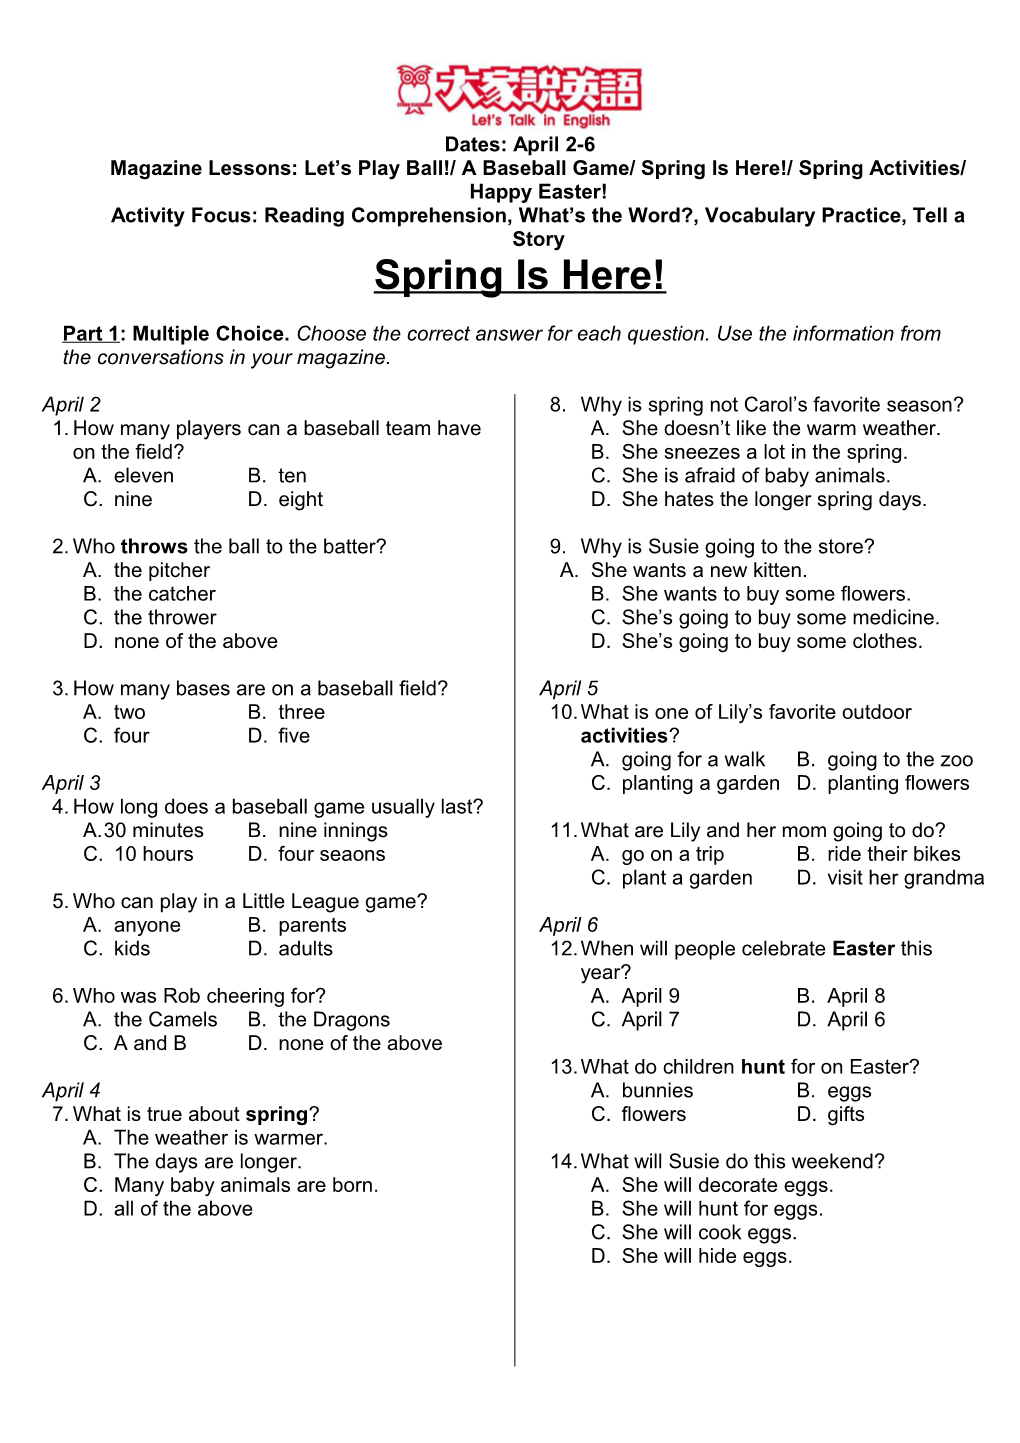 Activity Focus: Reading Comprehension, What S the Word?, Vocabulary Practice, Tell a Story